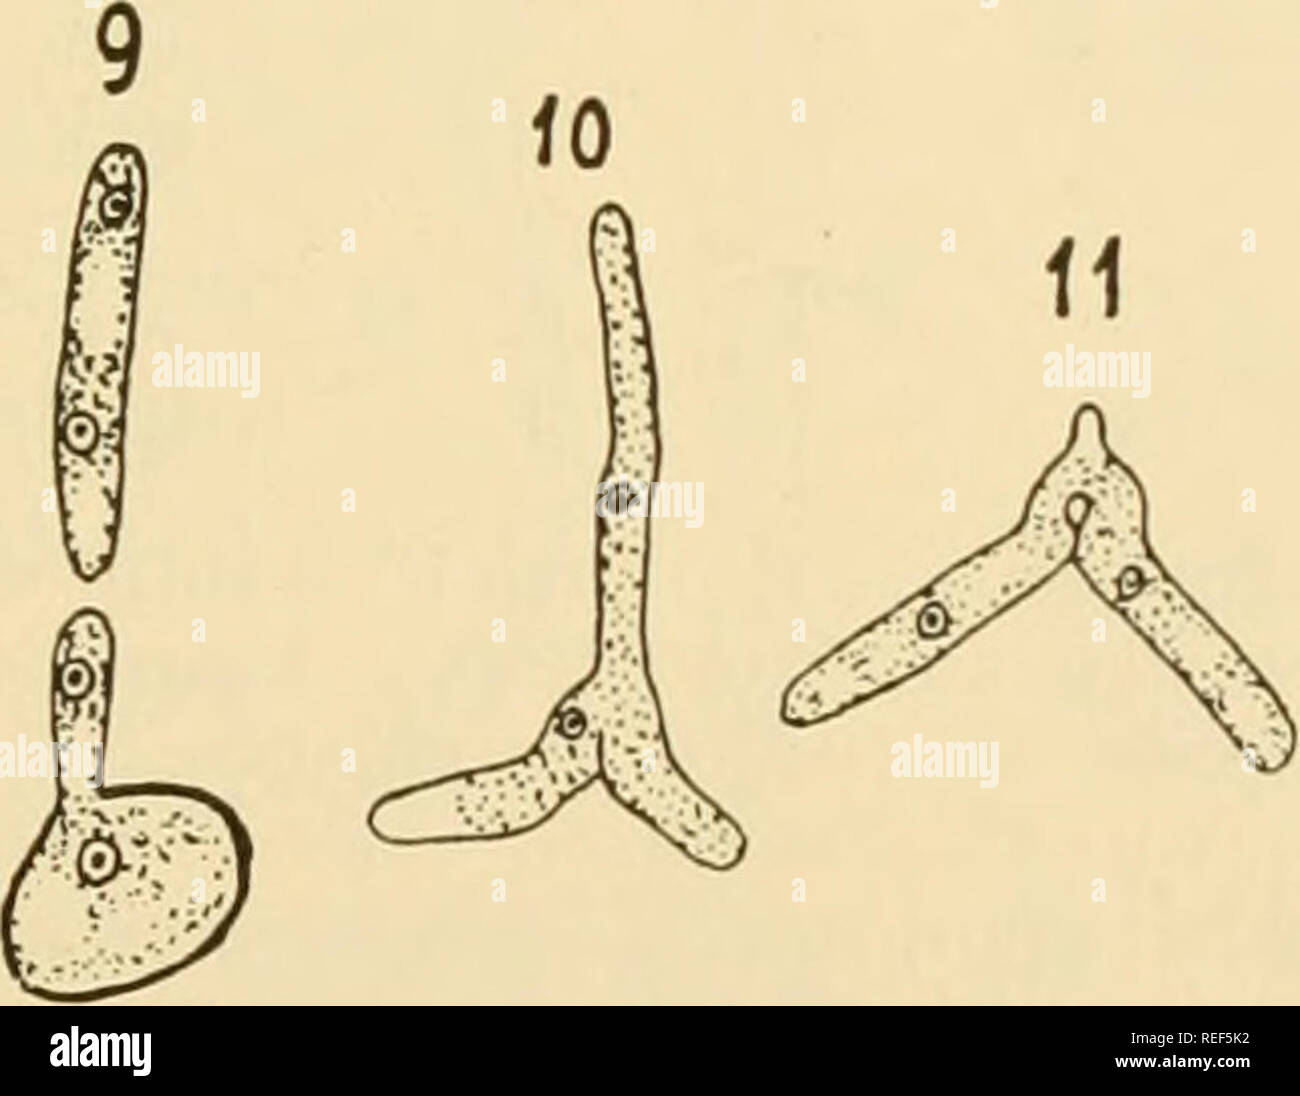 . Comparative morphology of Fungi. Fungi. Fig. 398.— Ustilago Vaillantii. 1 to 6. (X 1,300.) Ustilago longissima, var. macrospora 7 to 11. Germination of smut spores (X 1,100). (After Paravicini, 1917, and Bauch, 1923.) grow further. Their fate is unknown. On germination in nutritive solutions the germ tube remains very short and cuts off one or more sprout cells which generally fall away (Fig. 398, 2 to 4). The nucleus divides in three and forms two septa. The three-celled sprout mycelium cuts off at its septa further sprout cells which again become three-celled, etc. In older cultures, copul Stock Photo